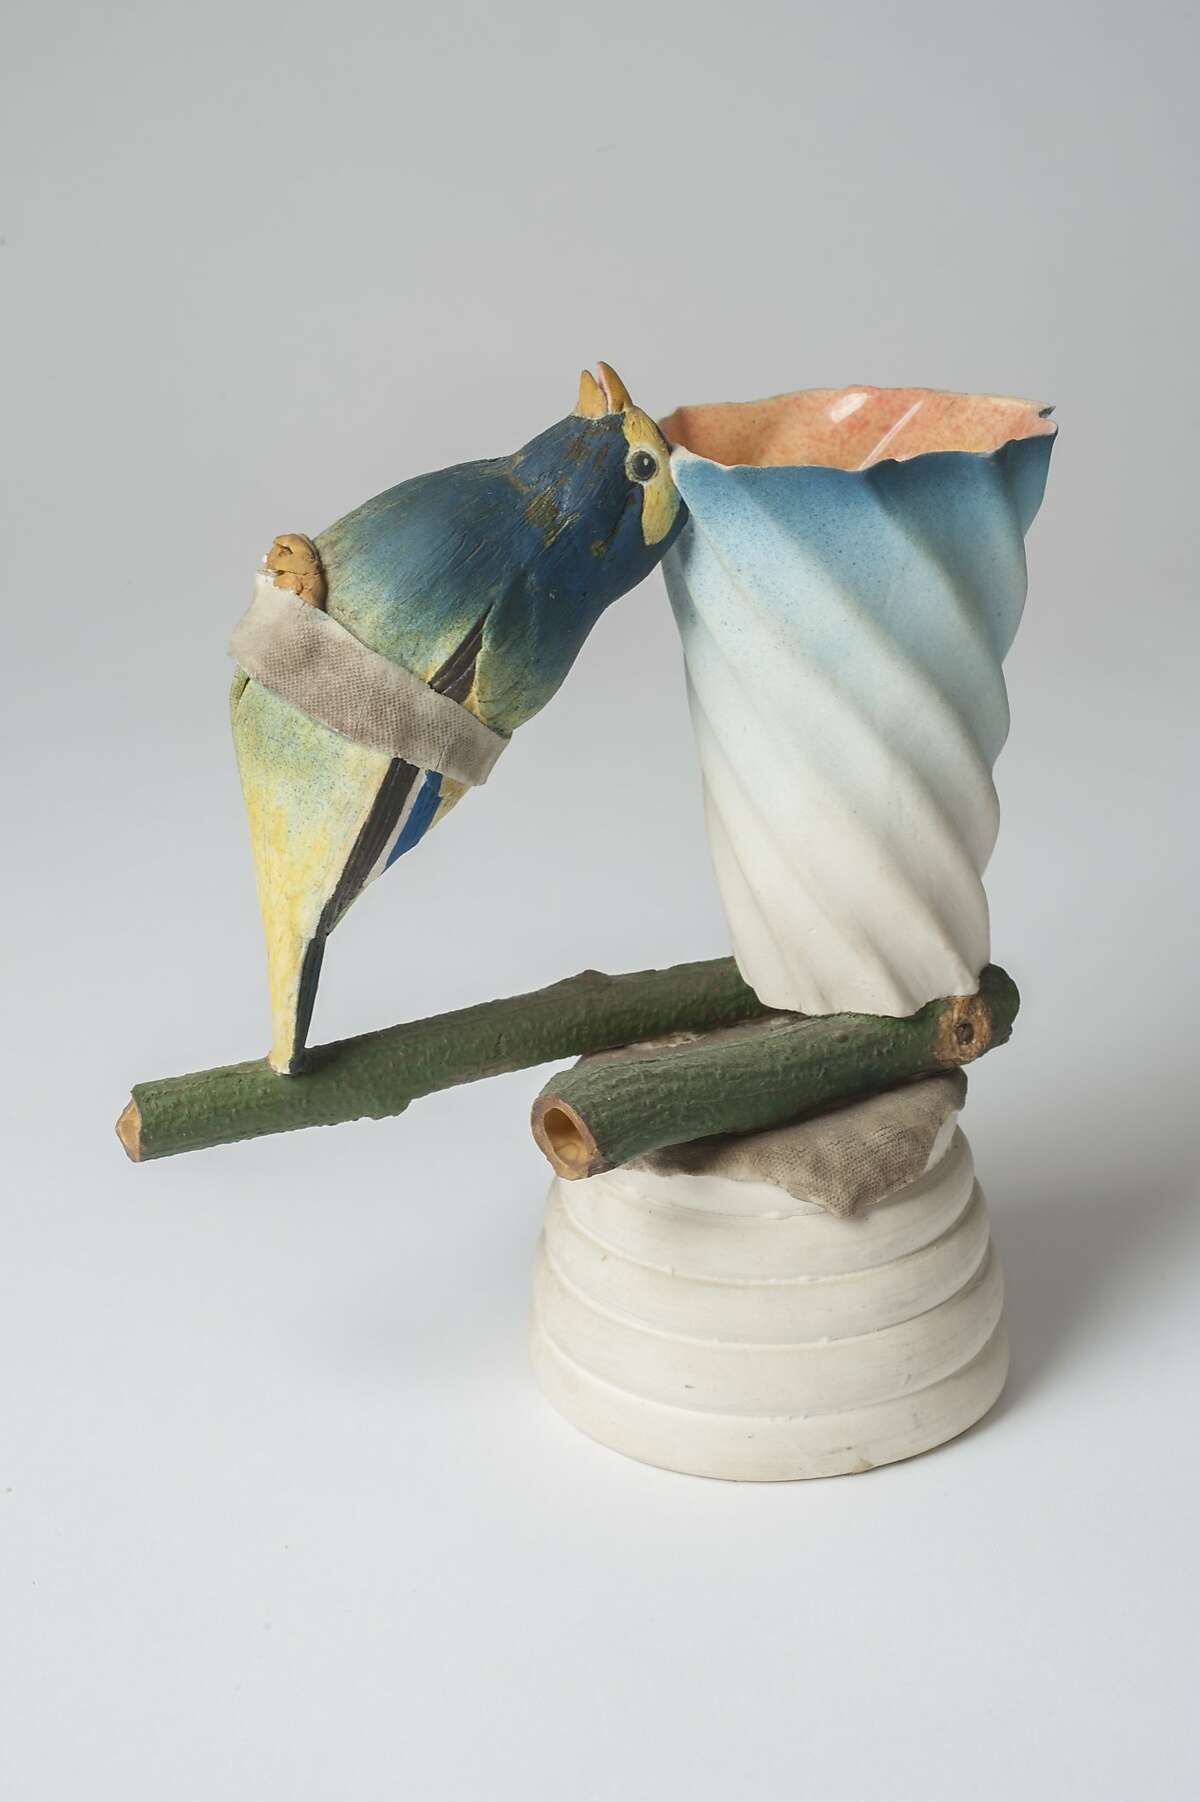 From "Ruth Braunstein: Focus on Clay": Richard Shaw Untitled, ceramic sculpture, 7 x 9 x 4 inches, 1972 [Photo: Miguel Farias]